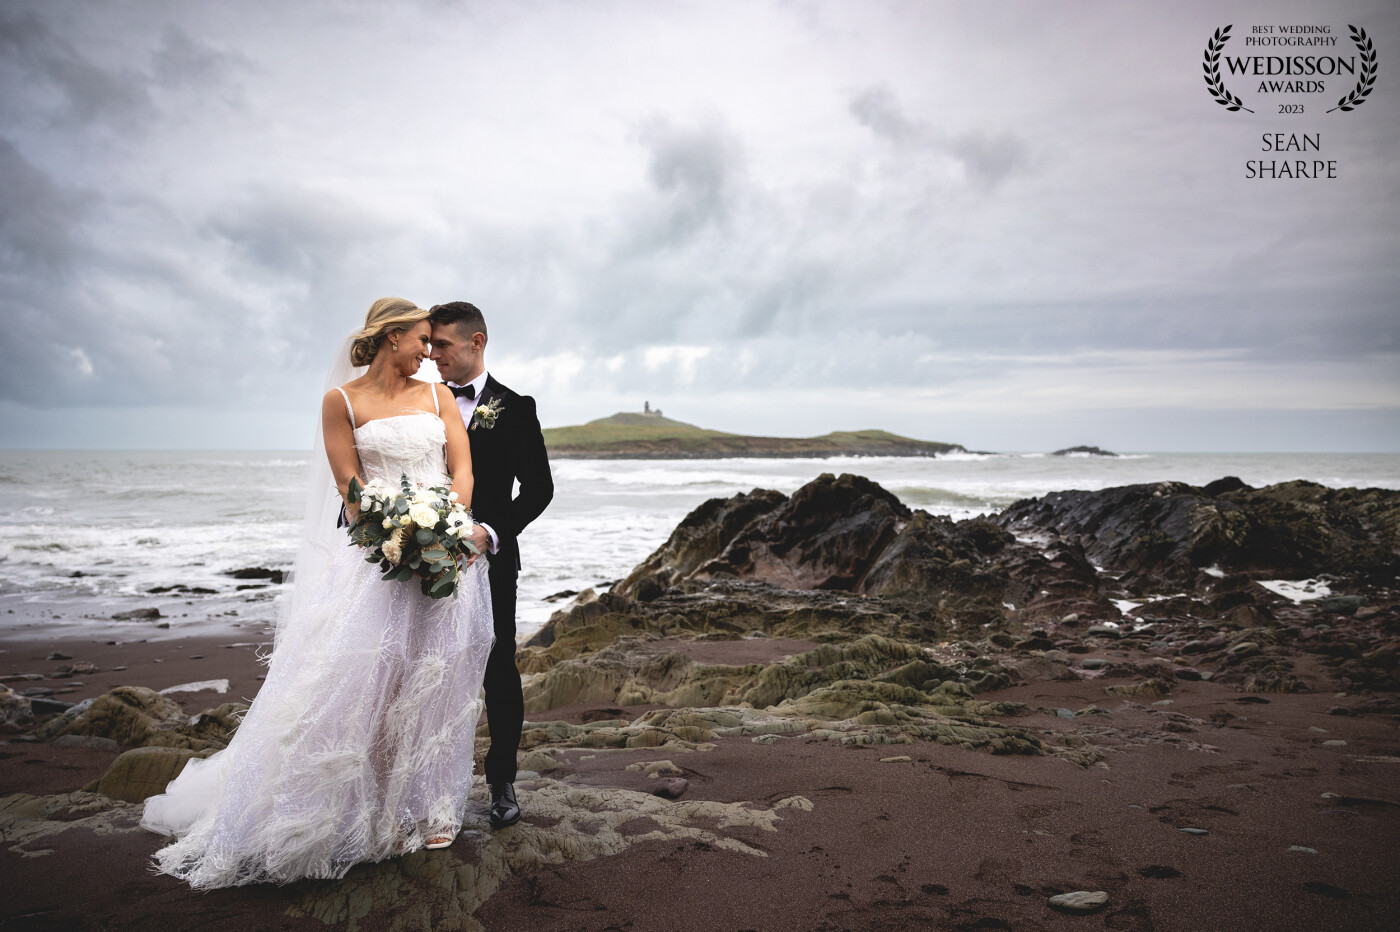 Jesse and John on New Years Eve at the beautiful Ballycotton beach, Cork. Absolutely stunning wedding day to bring in the new year!